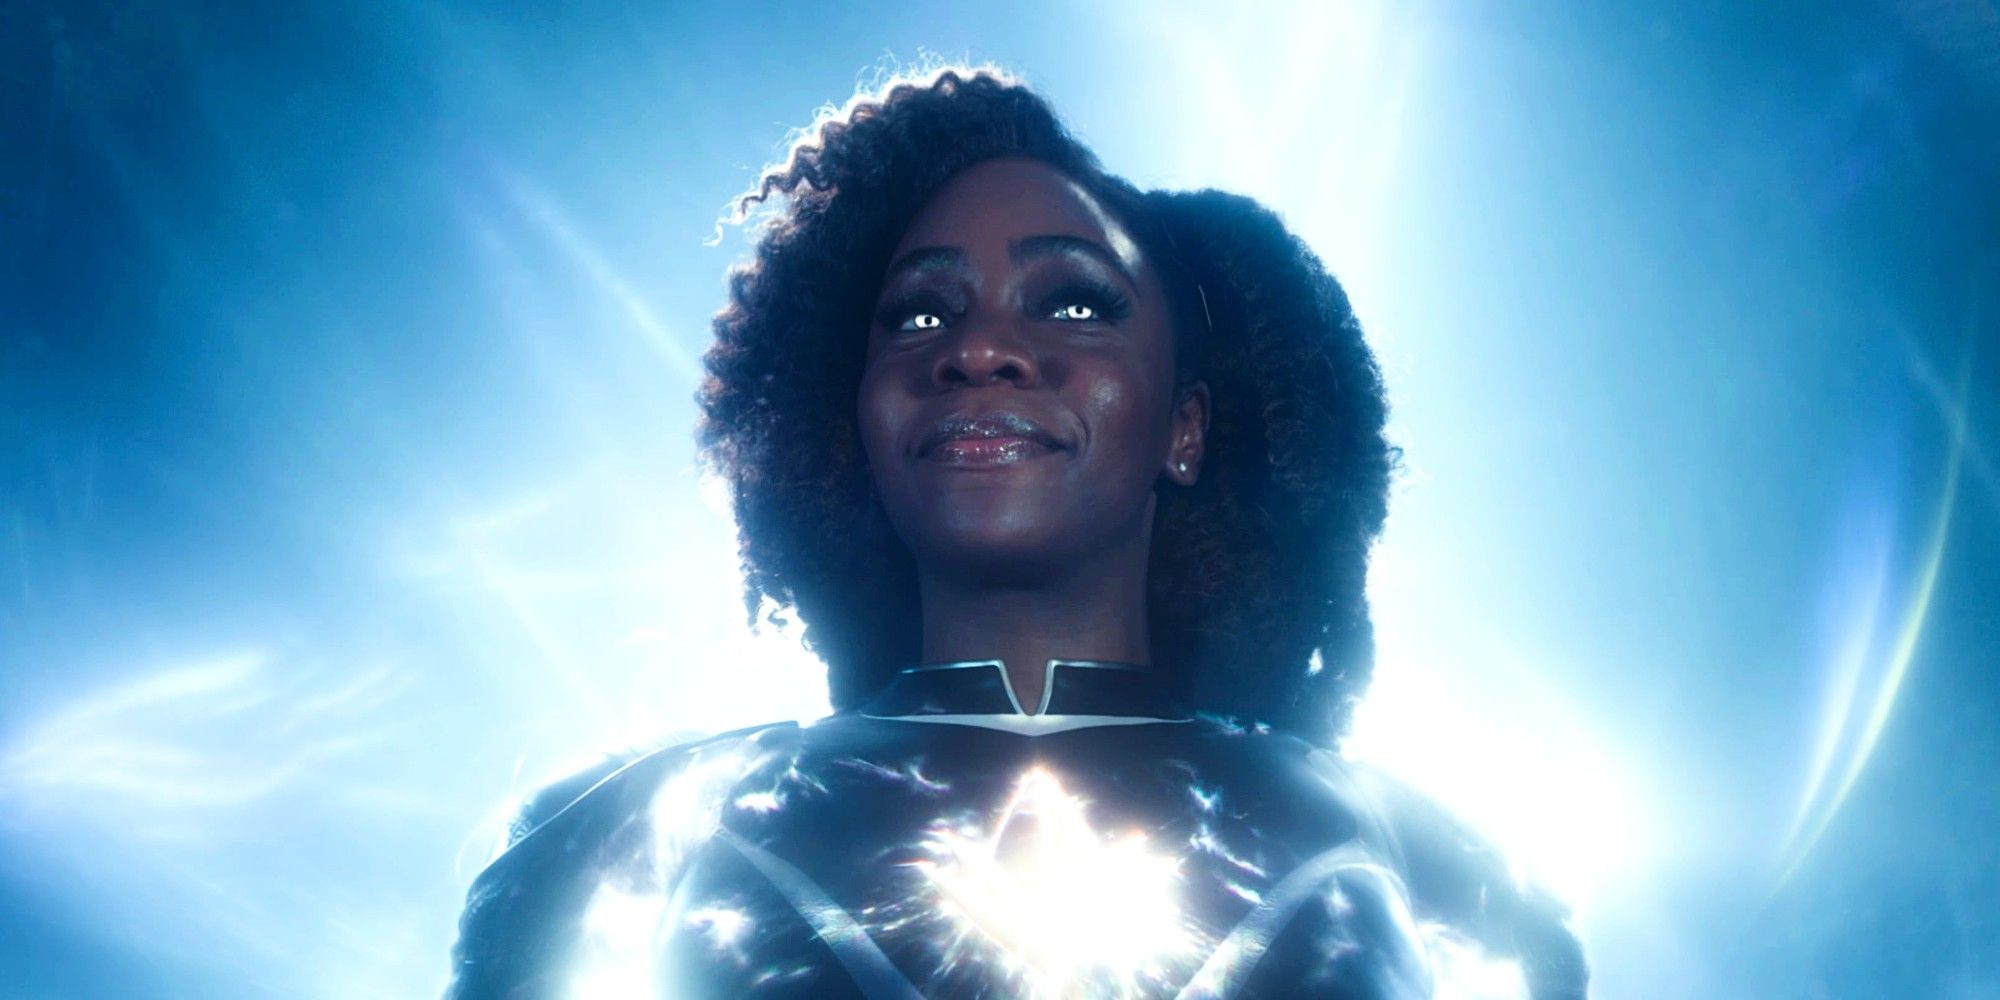 Teyonah Parris as Monica Rambeau Fully Charged With Energy And Smiling In The Marvels